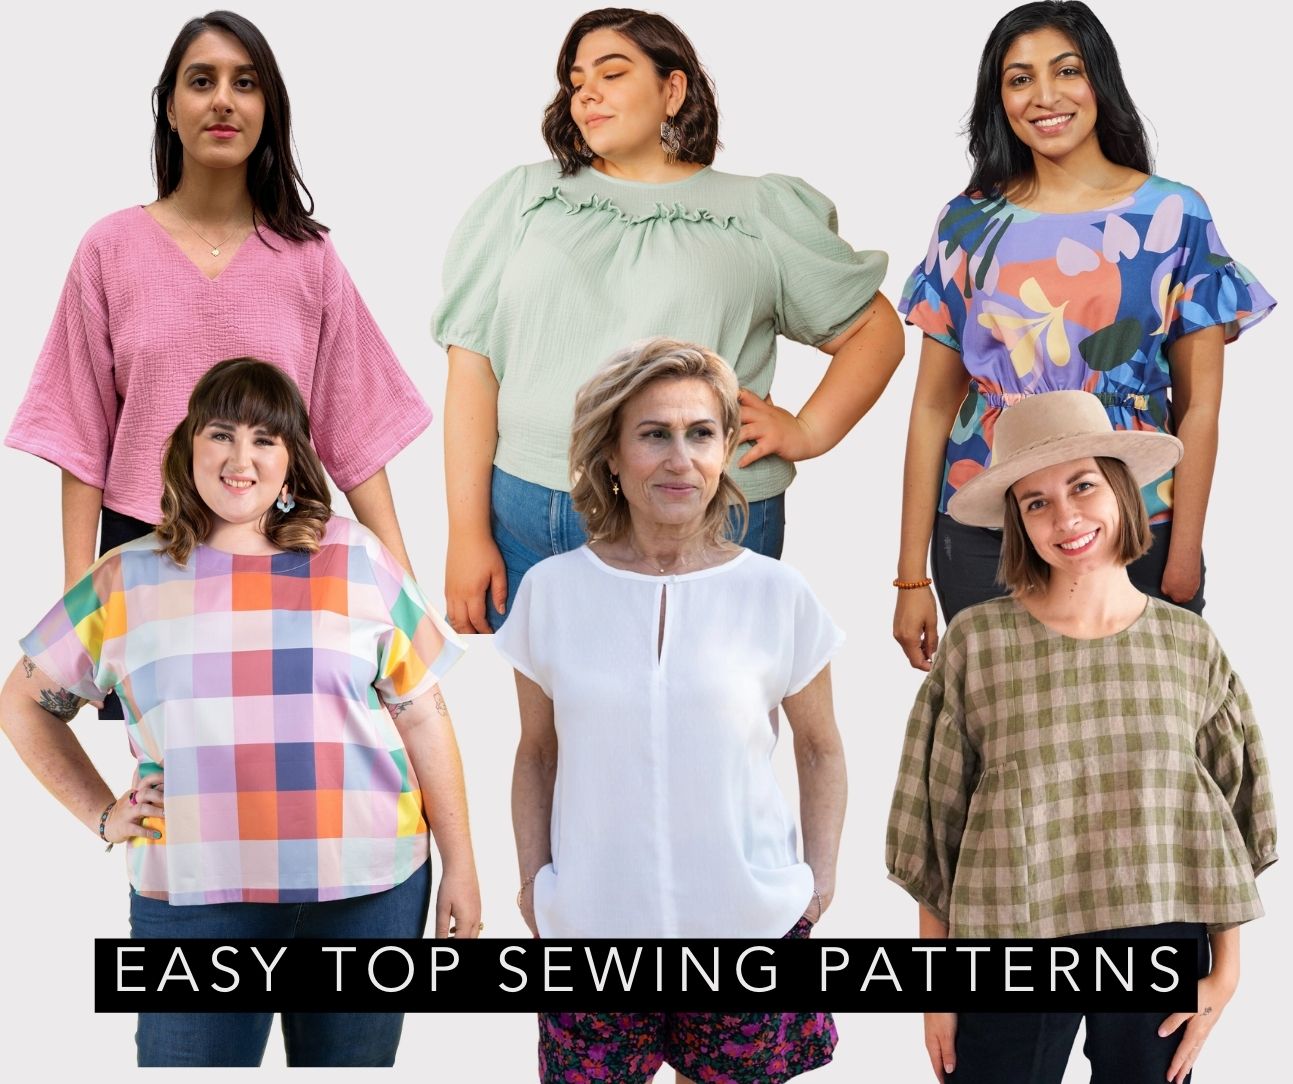 Free Sewing Patterns for Womens Tops, Shirts, Blouses, Printable PDFs, DIY Fashion Crafts